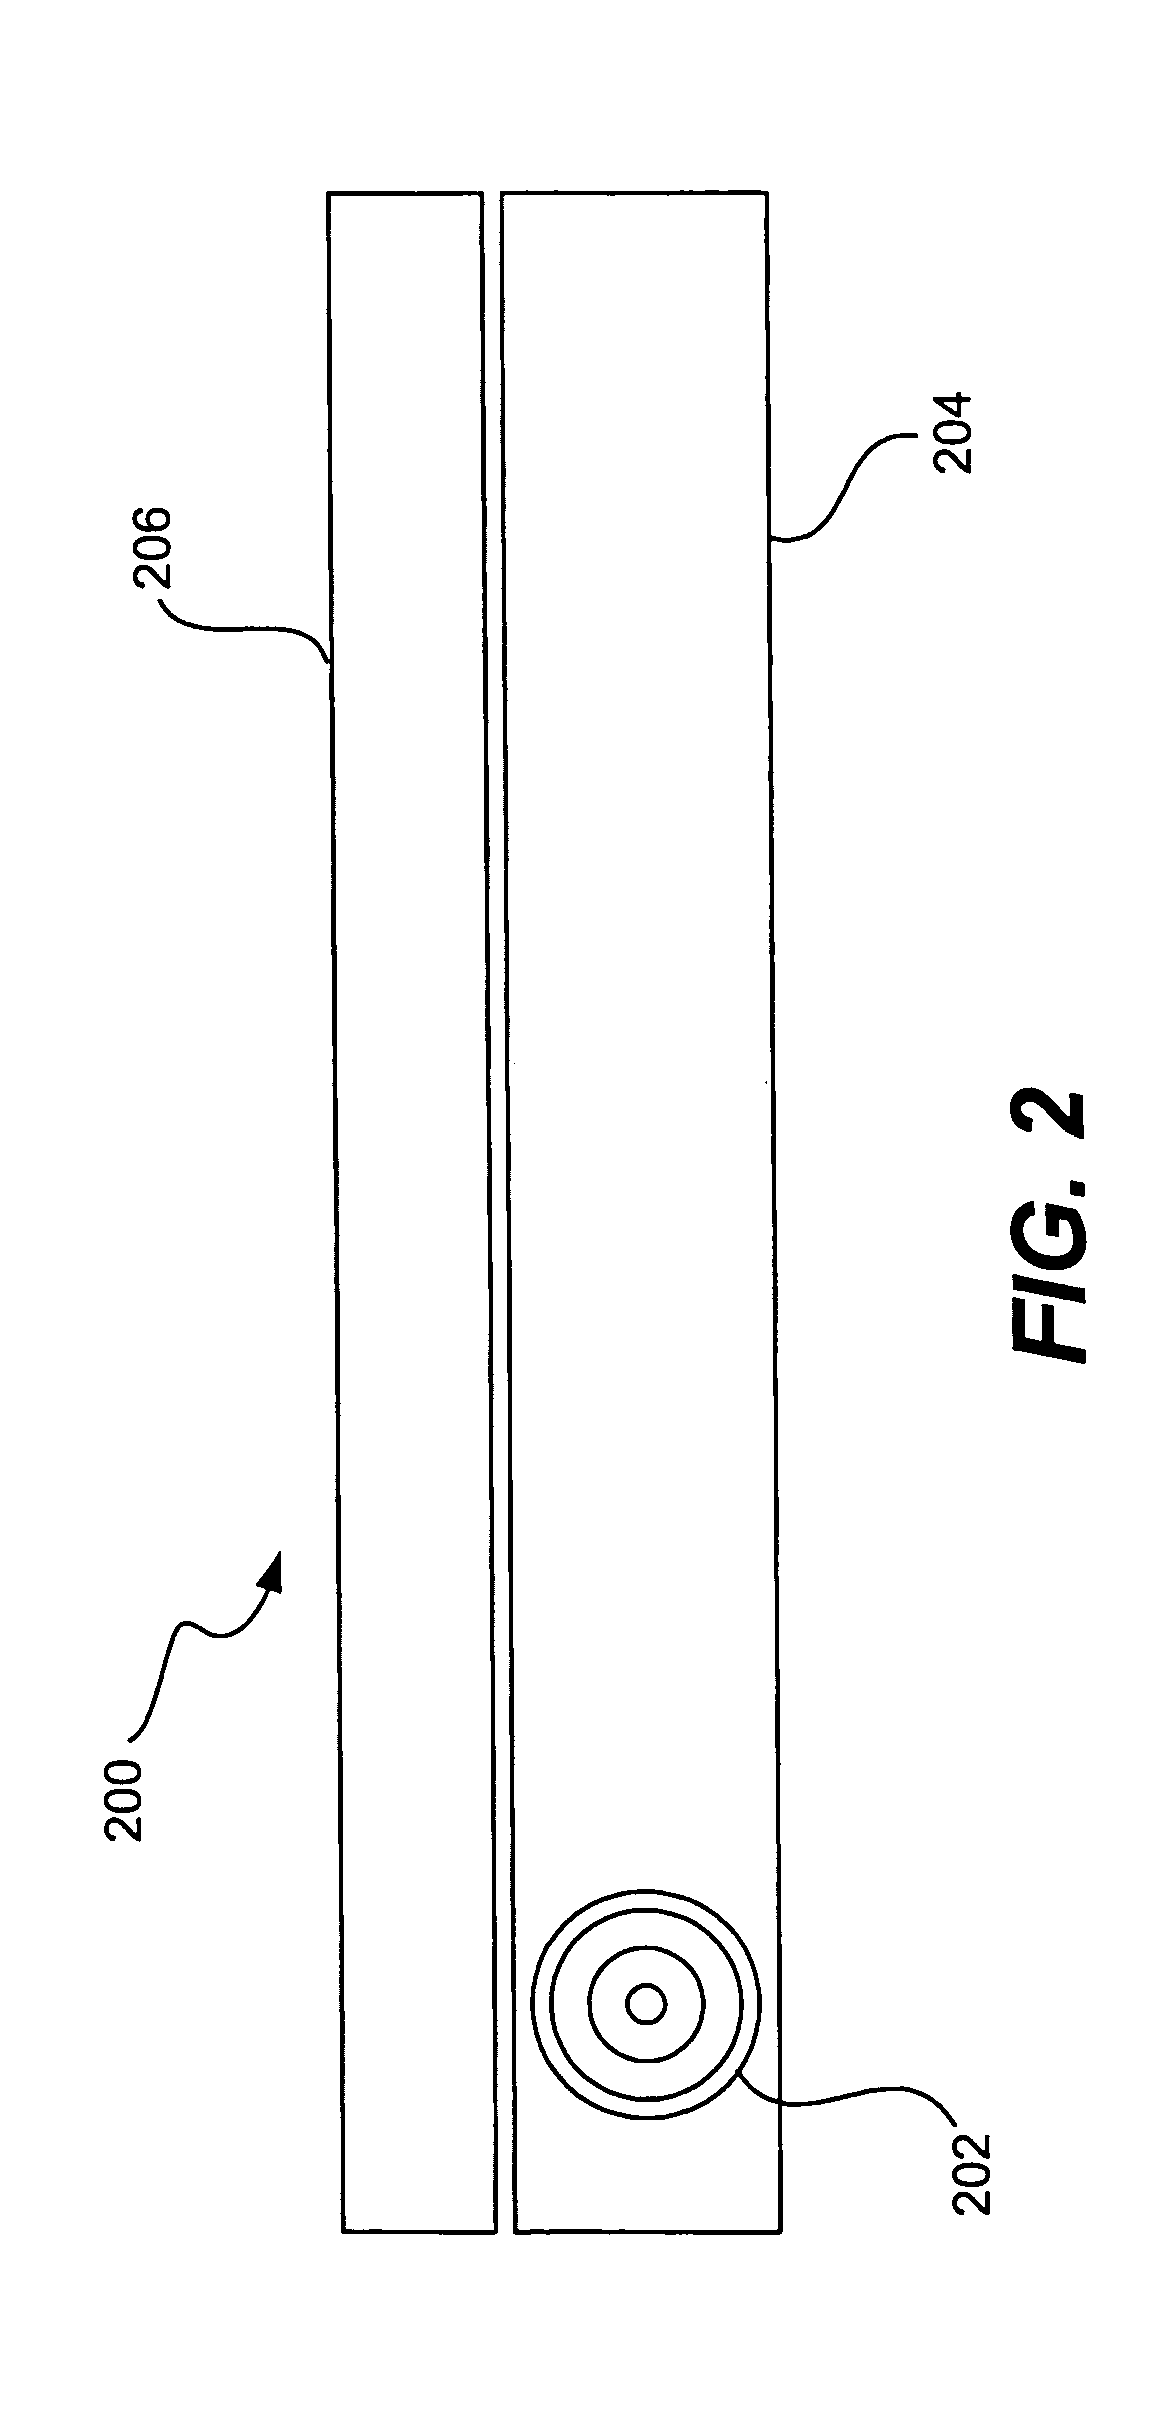 Housing for a computing device